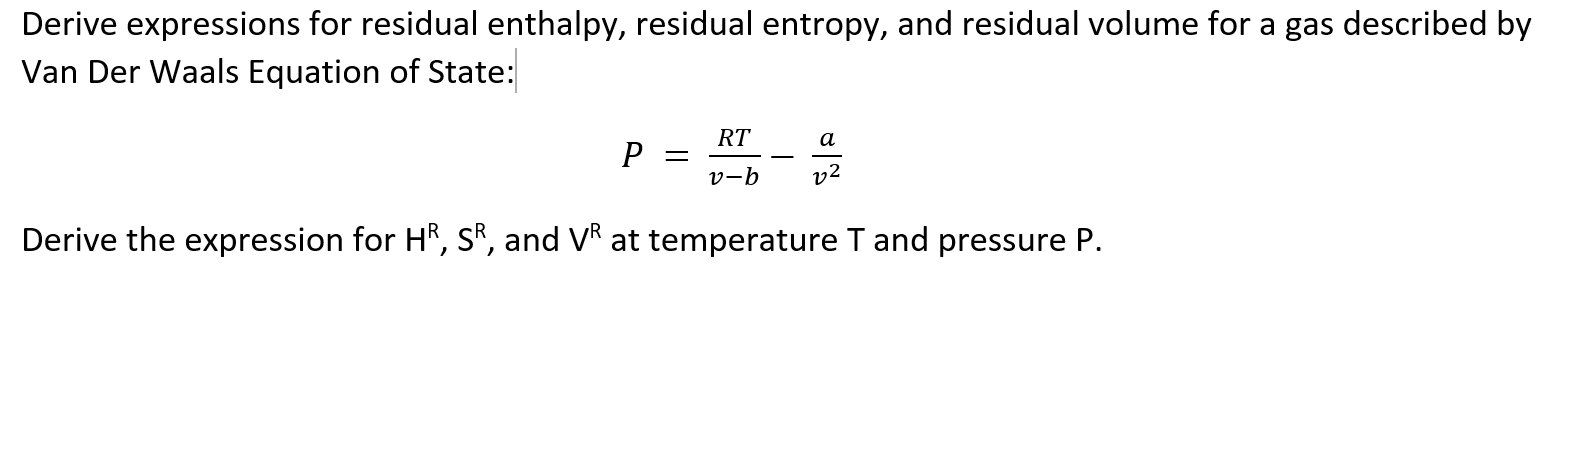 Solved Derive expressions for residual enthalpy, residual | Chegg.com